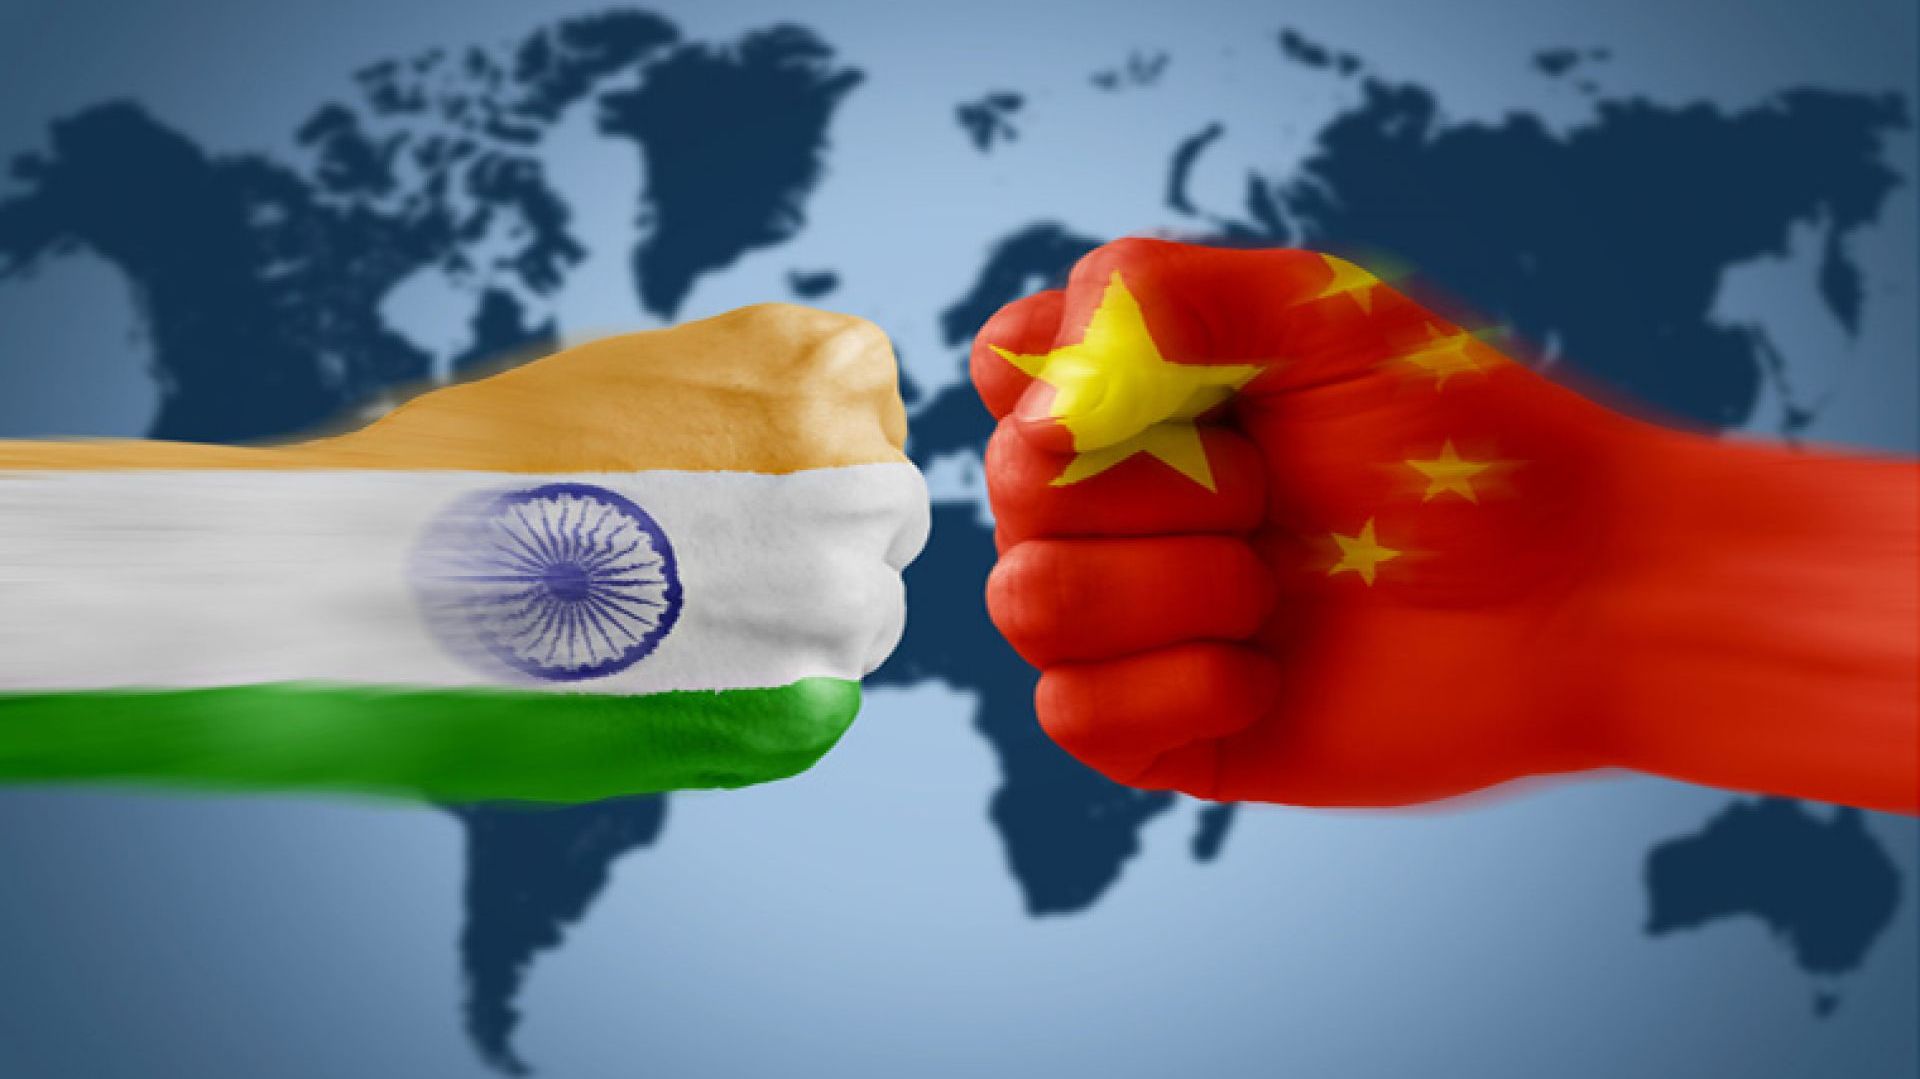 The dragon starts panting against India in this region, with China not even around in the race